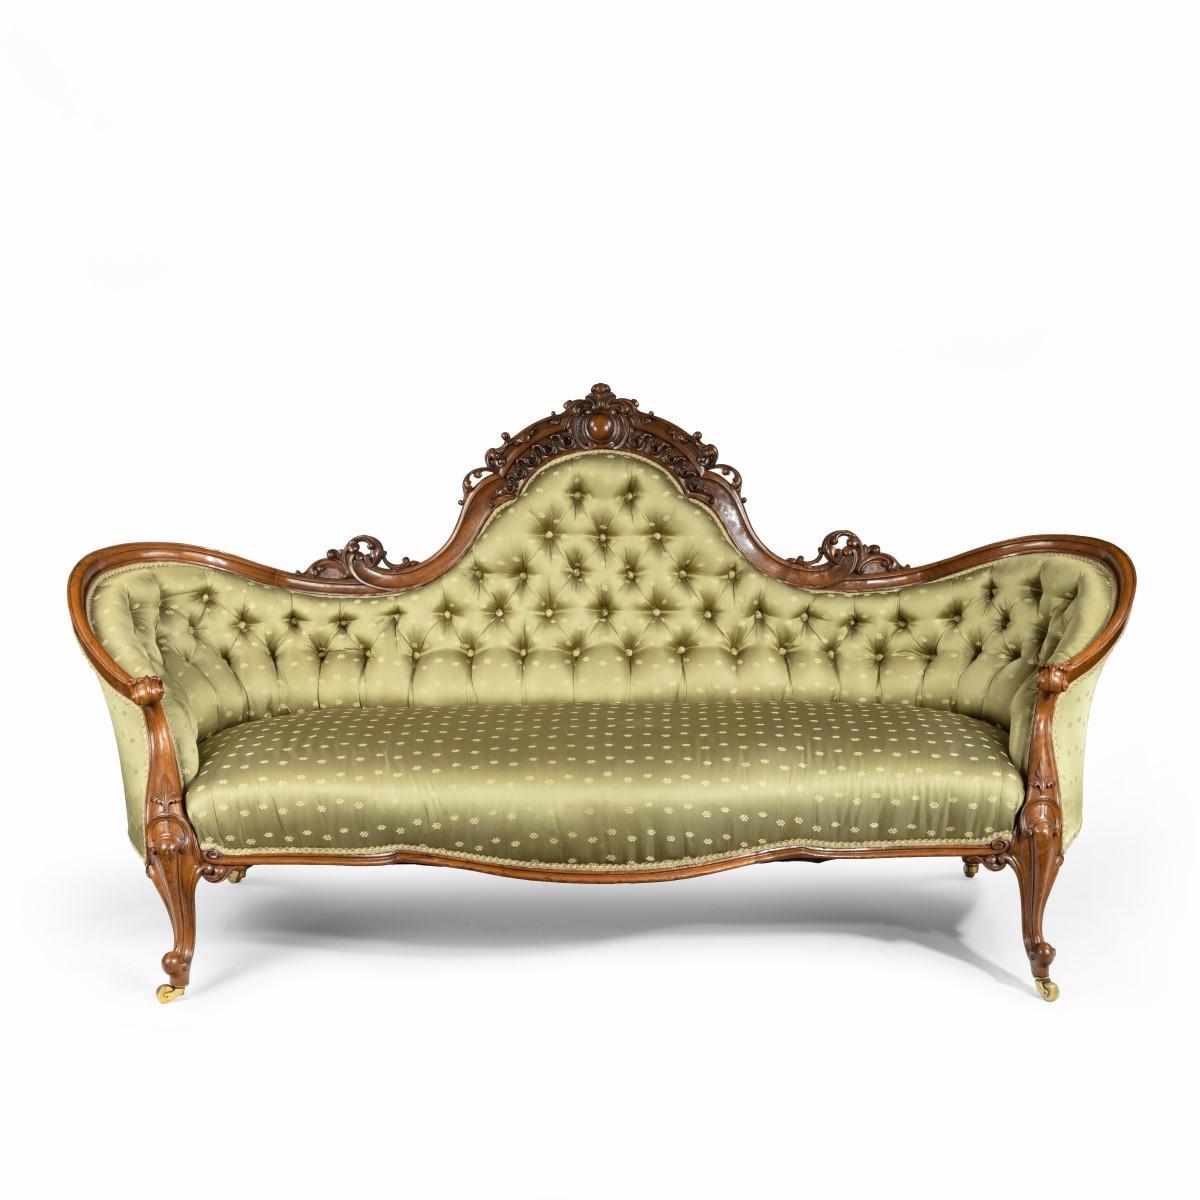 An elaborate Victorian shaped walnut sofa, the deep-buttoned back with an arched cresting rail and upswept corners curving down to scrolling arms continuing into cabriole legs with brass castors, with a serpentine seat rail, carved with a central